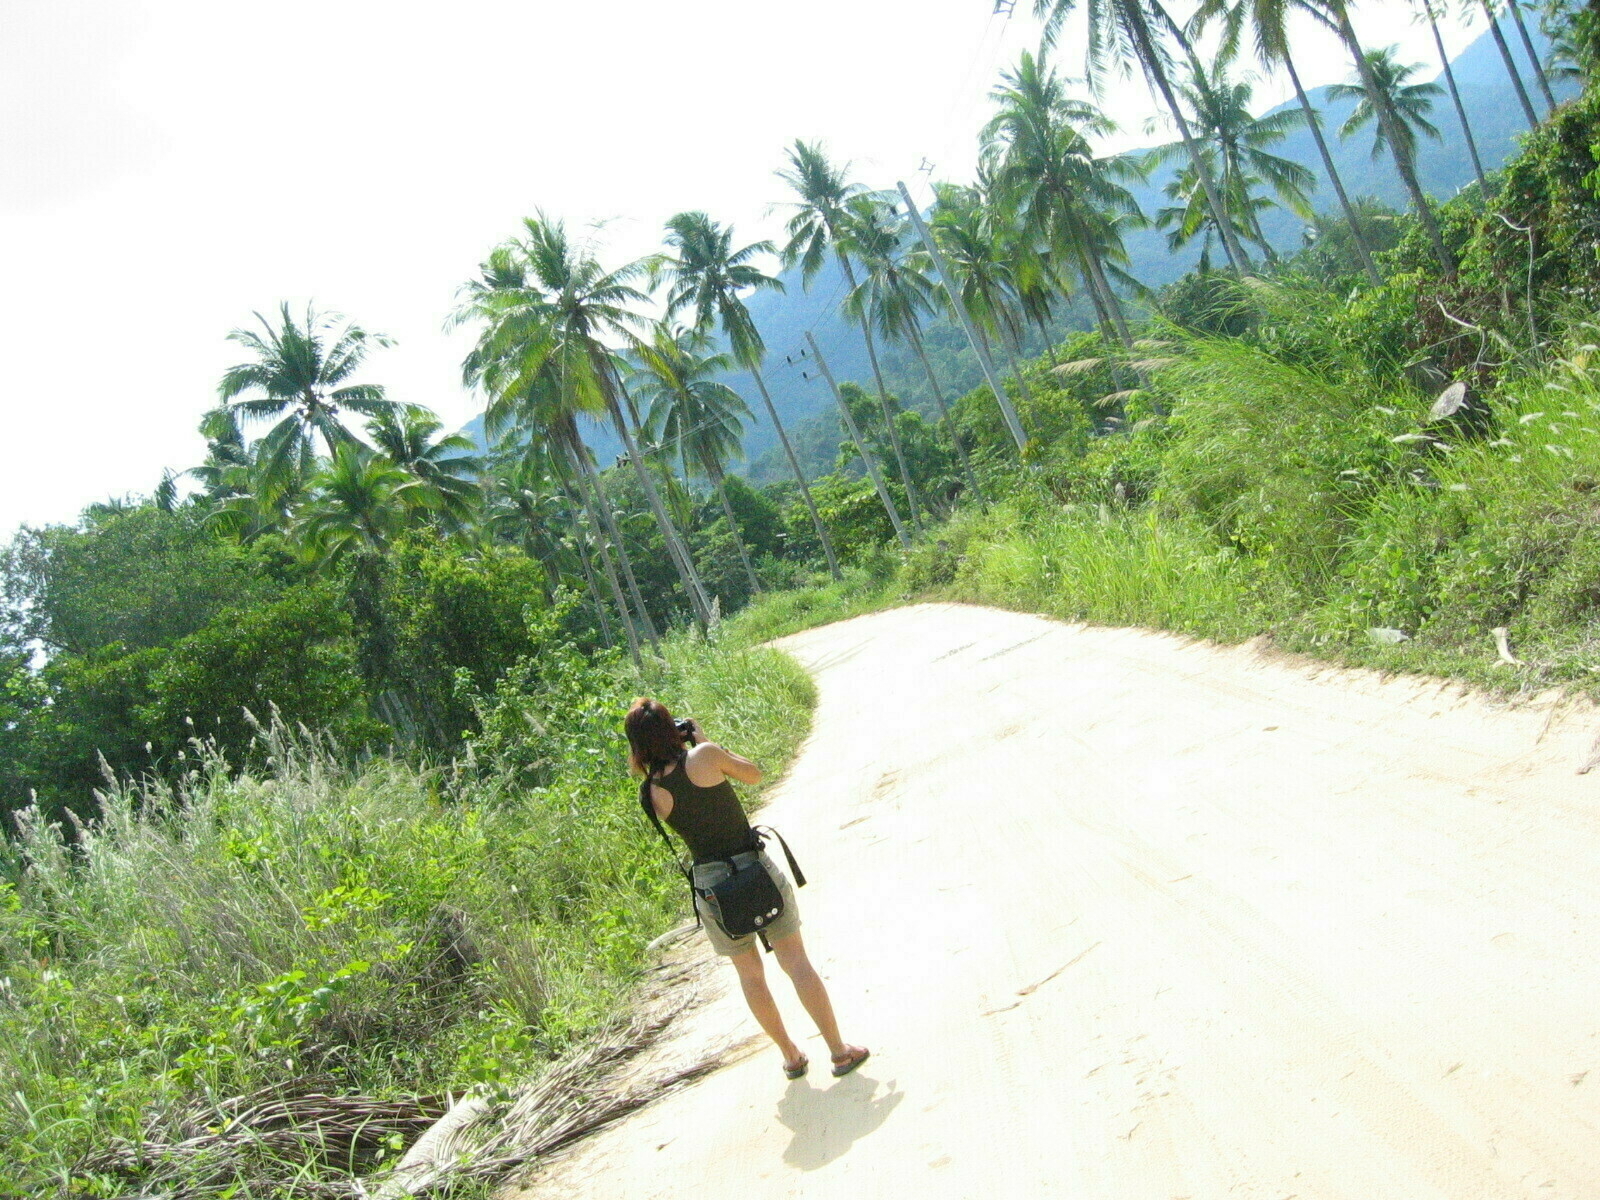 a woman standing in a tropical island taking a photograph of the trees and sandy path